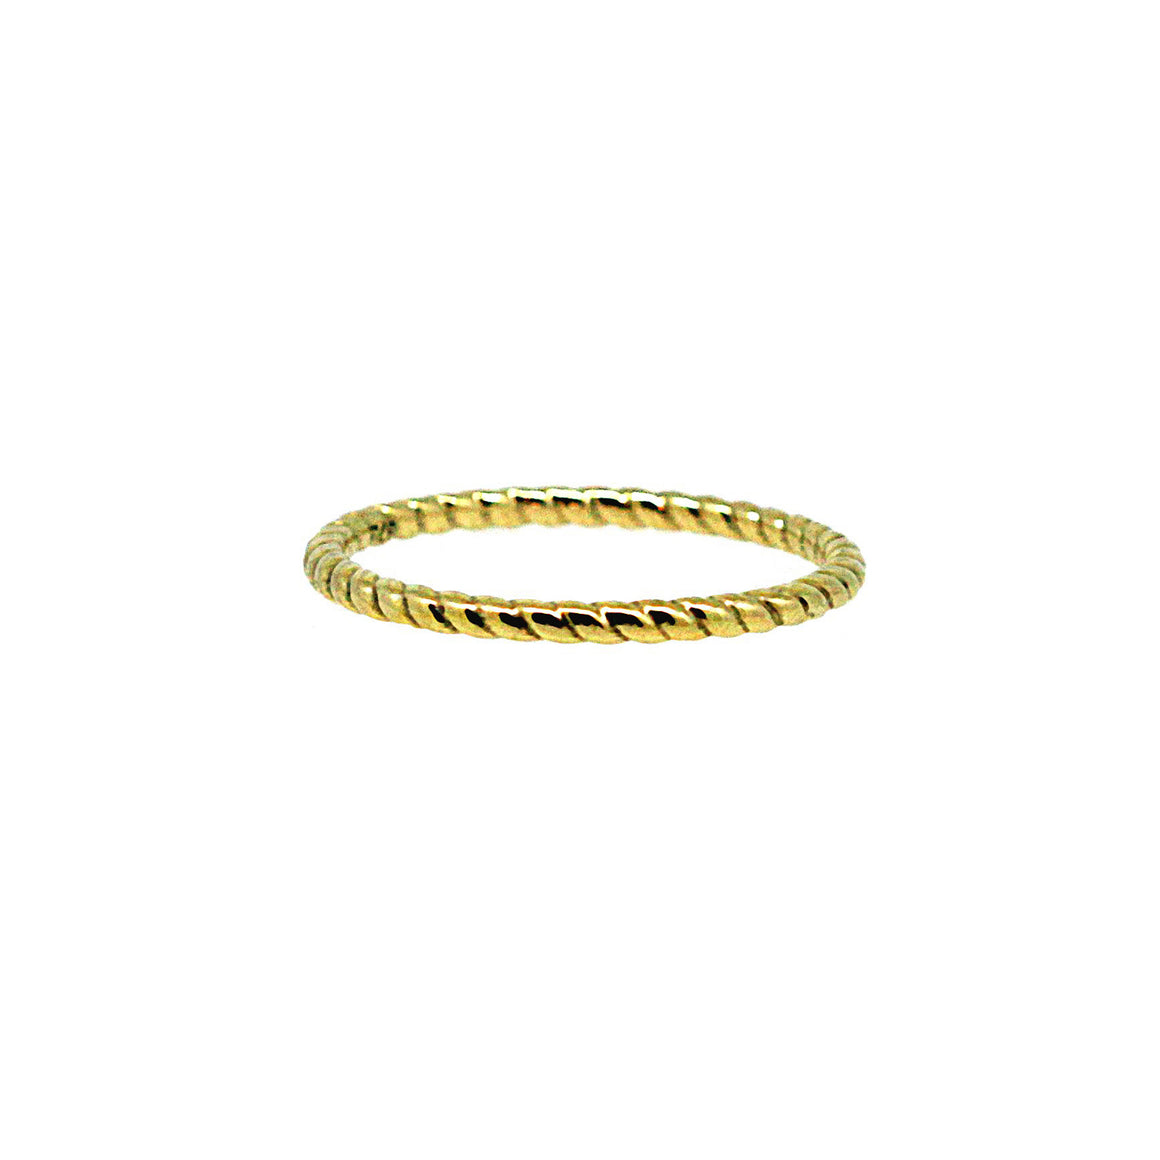 Fine twist pattern ring in yellow gold, perfect for stacking